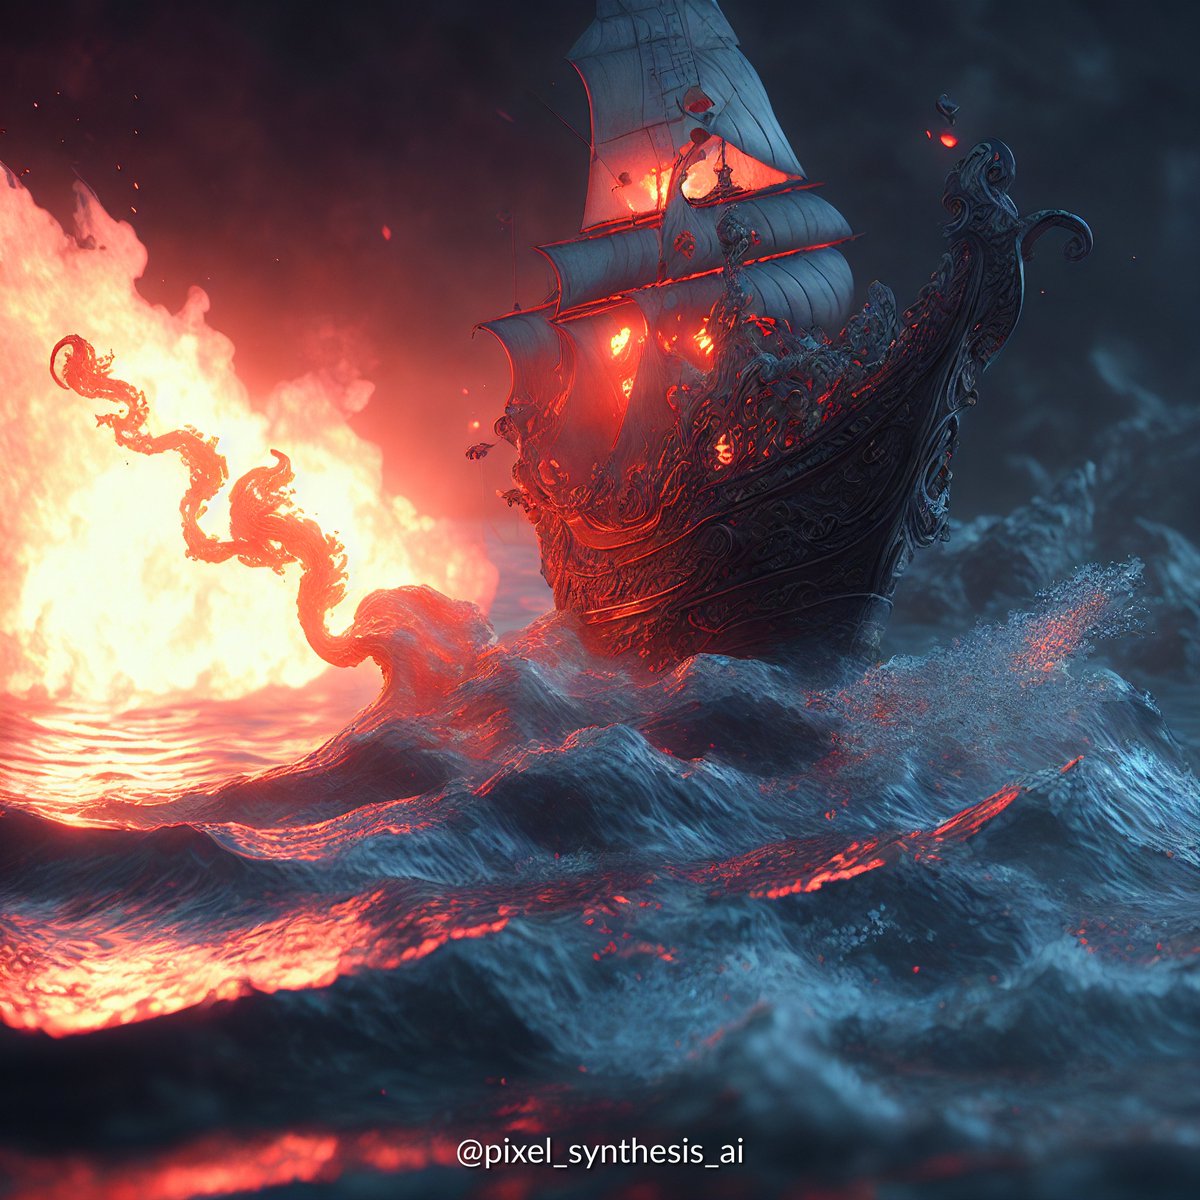 Dive into the intense scene of Fire at Sea, rendered by AI 🔥🌊.

#aiart #aigeneratedart #stablediffusionart #sdxl #huggingface #openai #chatgpt #civitai #airender #digitalart #masterpiece #aiimage #aiimagery #ship #boat #fireinthesea #aiimagination #aiartwork #aidesign #aiartist